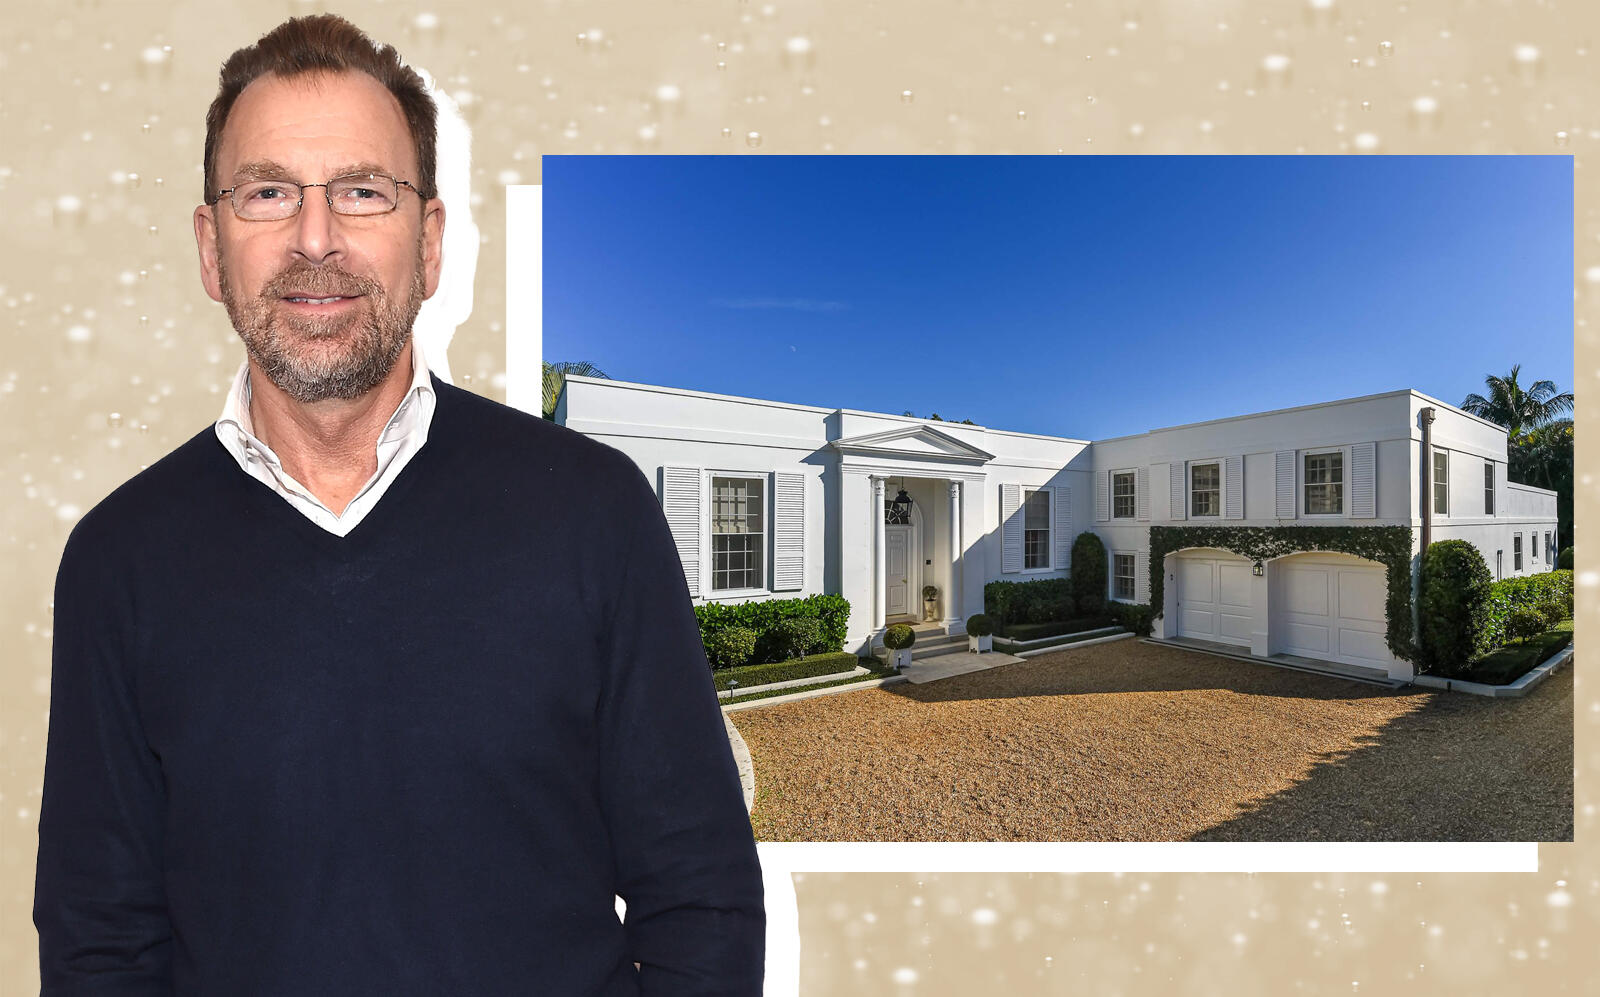 Edgar Bronfman Jr. and his Palm Beach home (Getty, 200 Regents / Sotheby's)